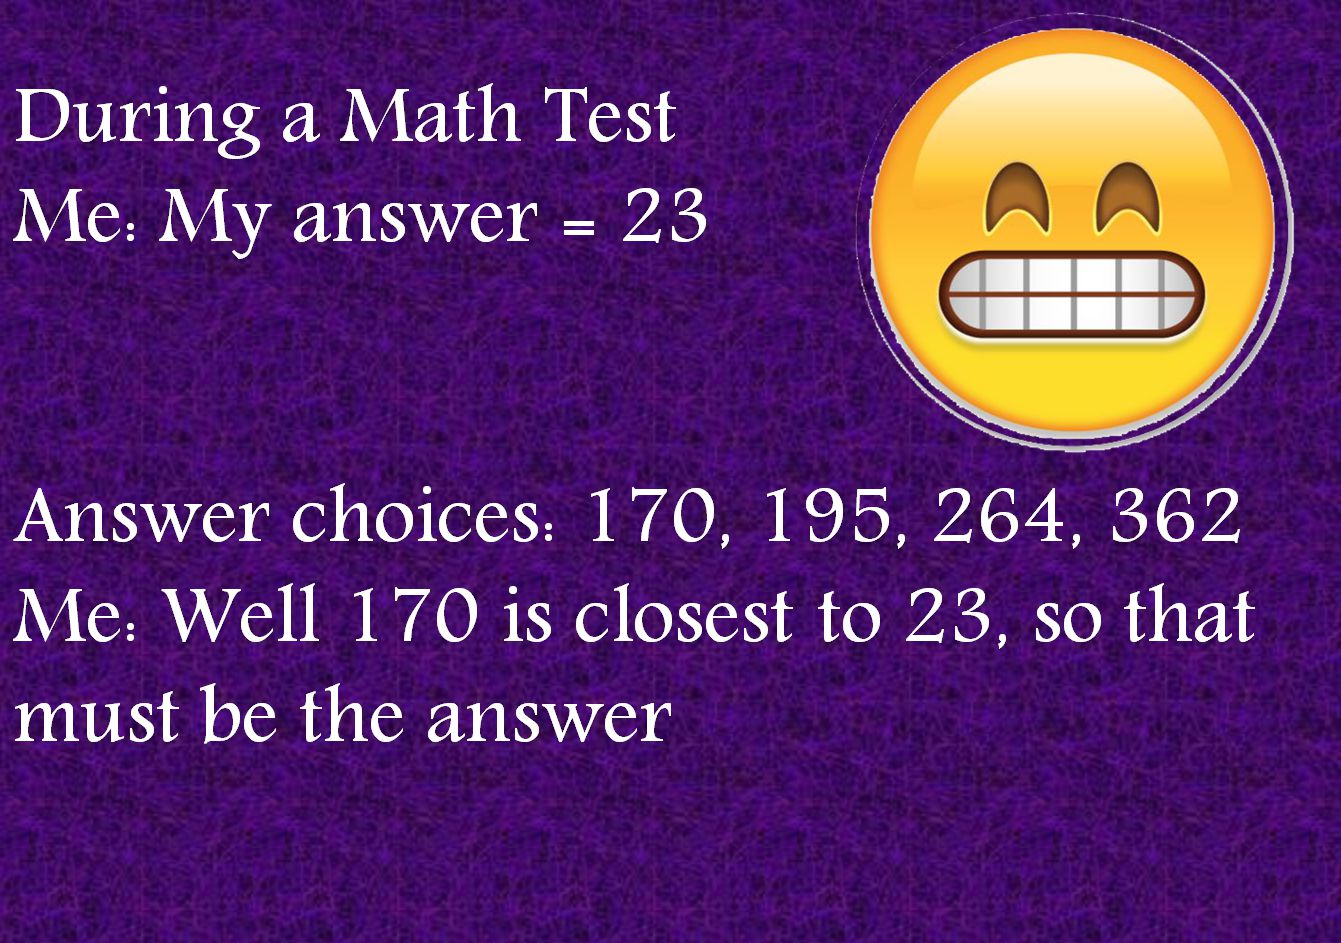 During a Math TestMe: My answer = 23Answer choices: 170, 195, 264, 362Me: Well 170 is closest to 23, so that must be the answer